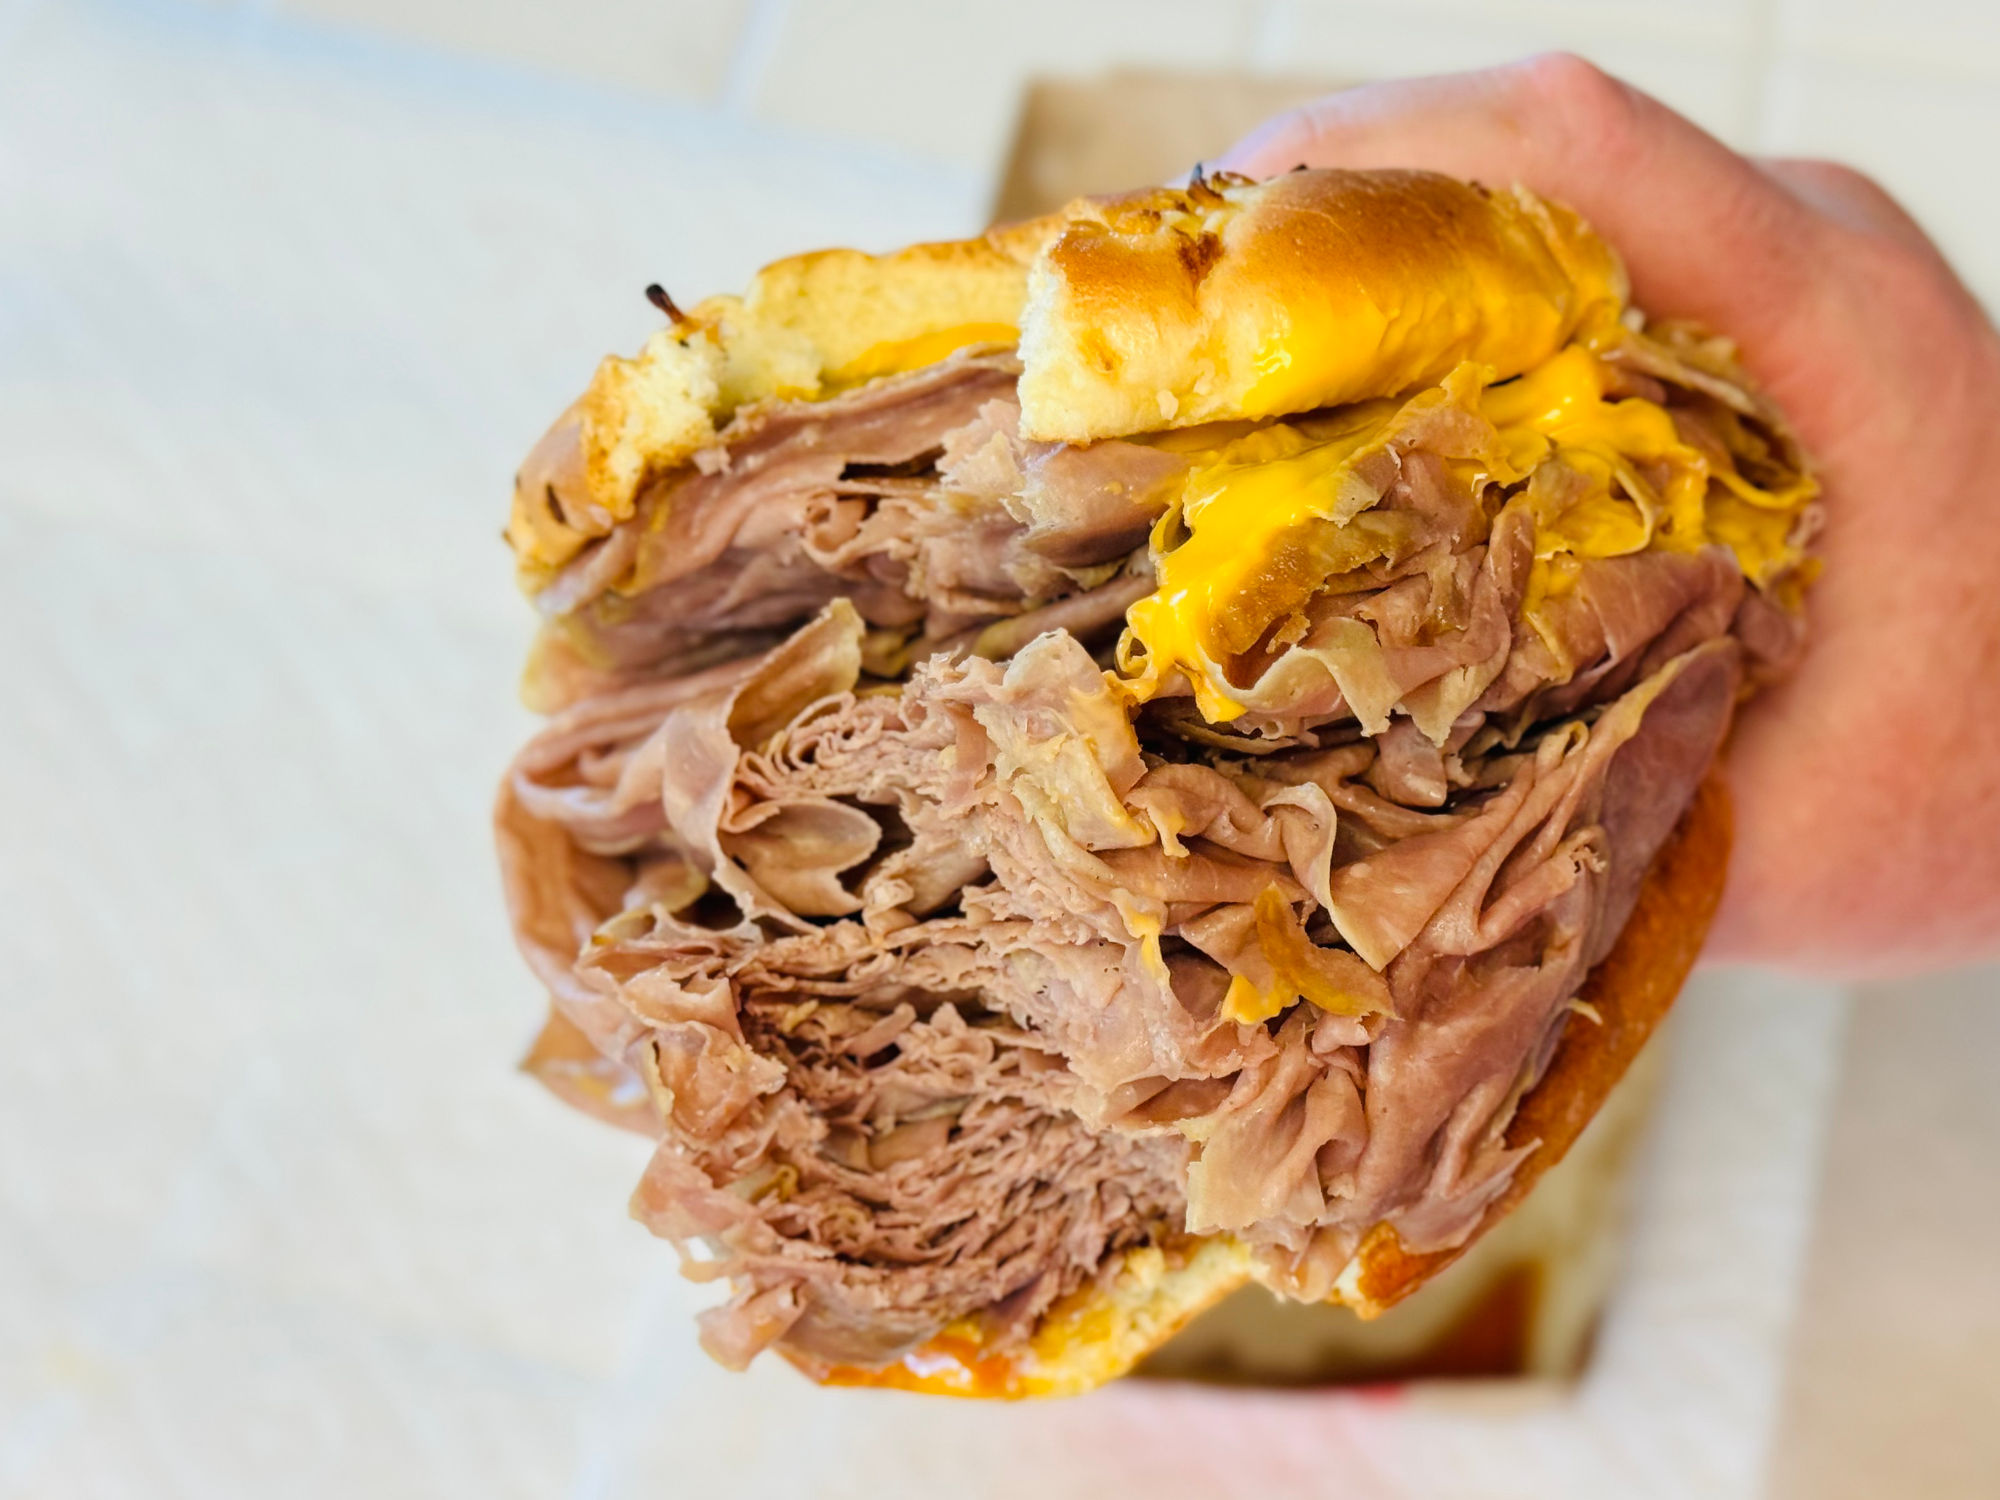 Arby's One Pound Beef & Cheddar